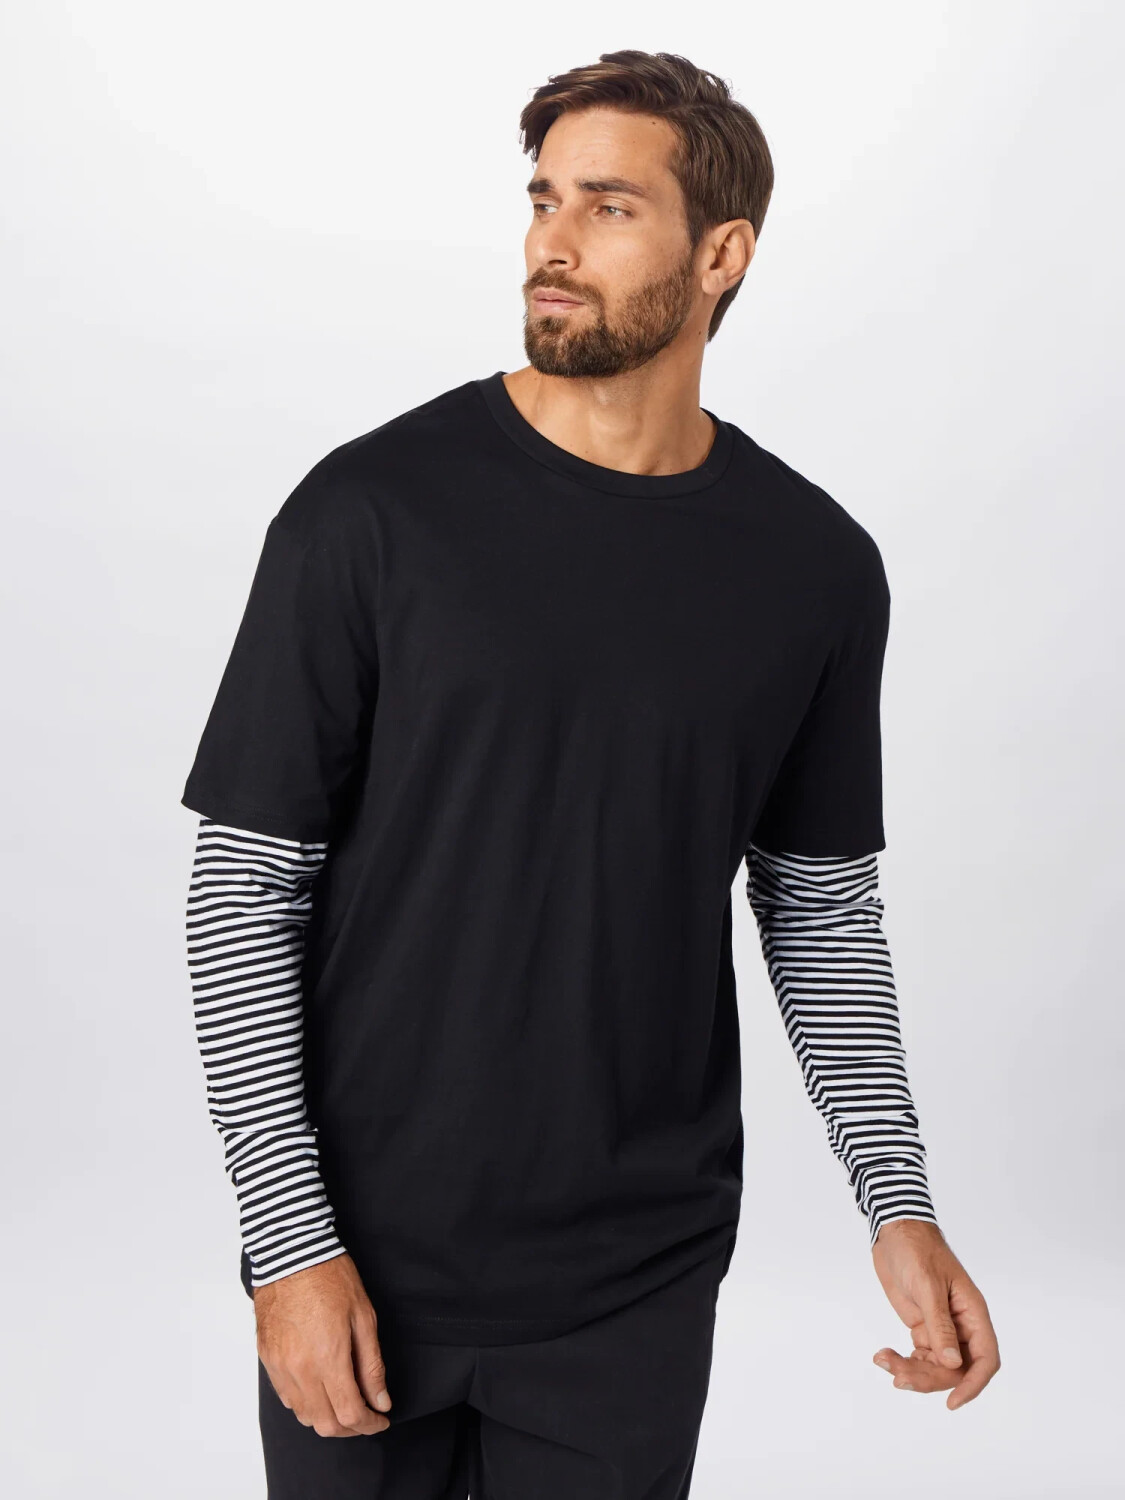 Striped Deals black (Today) Buy Double Urban Best on (TB3498) – LS from Classics Oversized Tee £11.99 Layer